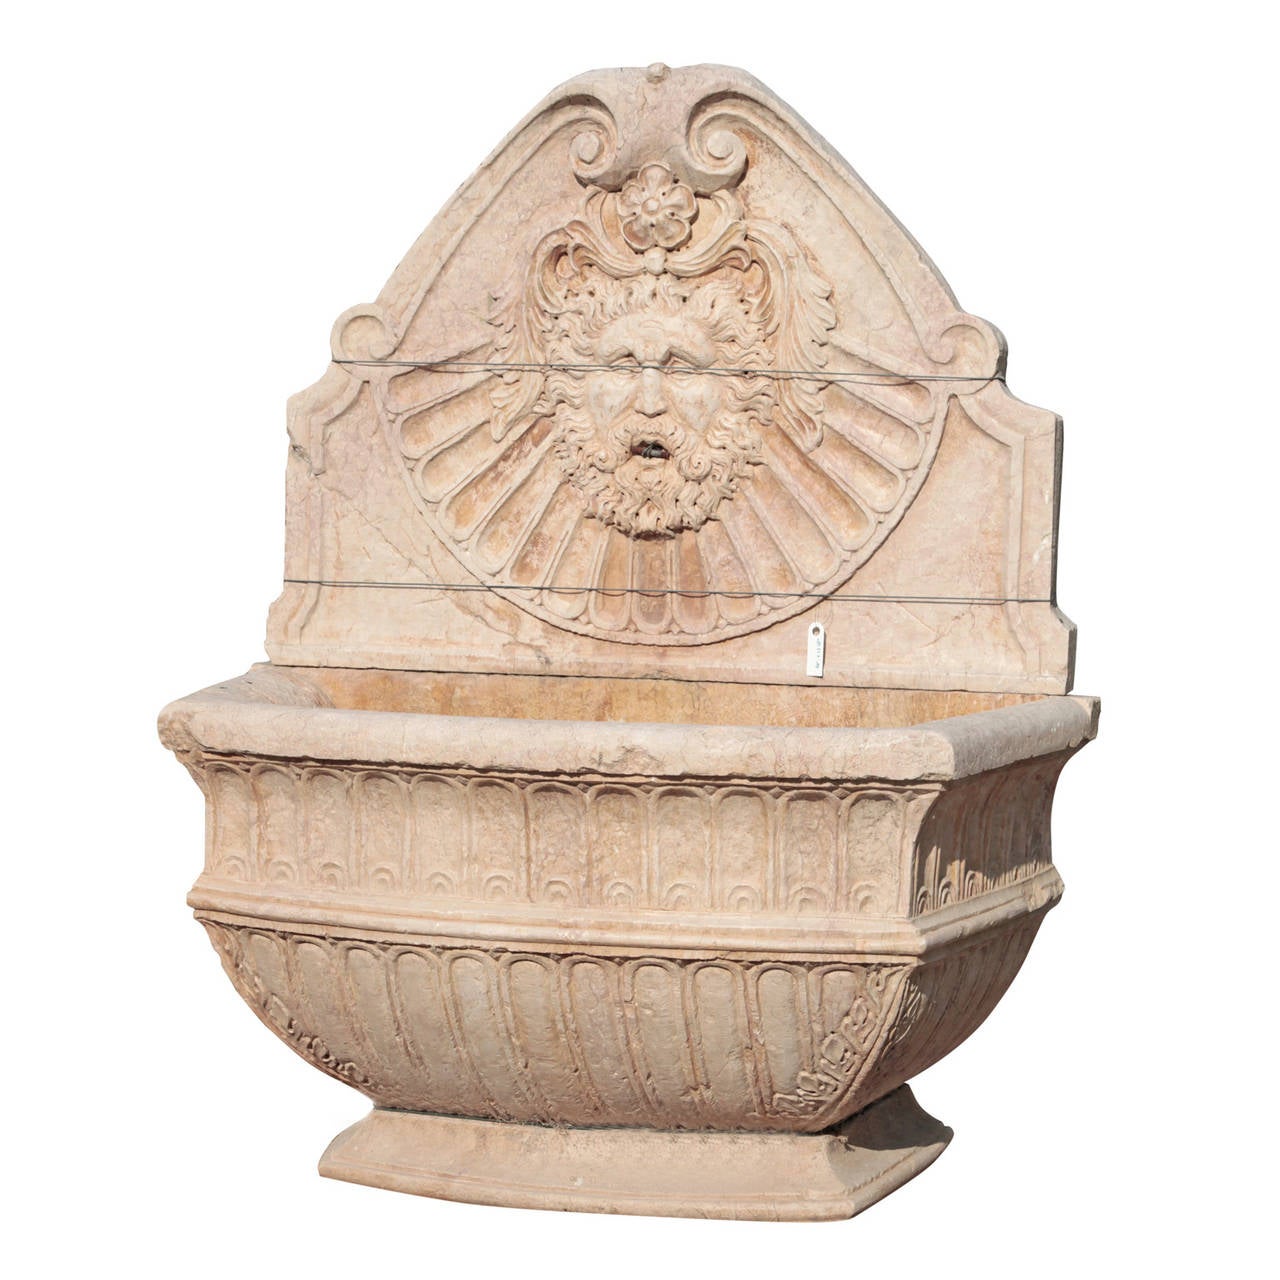 Magnificent Italian Rosso Verona Wall Fountain from the 20th Century.
The wall fountain is made out of bright rosso verona marble in the style of the 16th century. It has a bellied base and a sprawling basin with convex and concave curves. It is